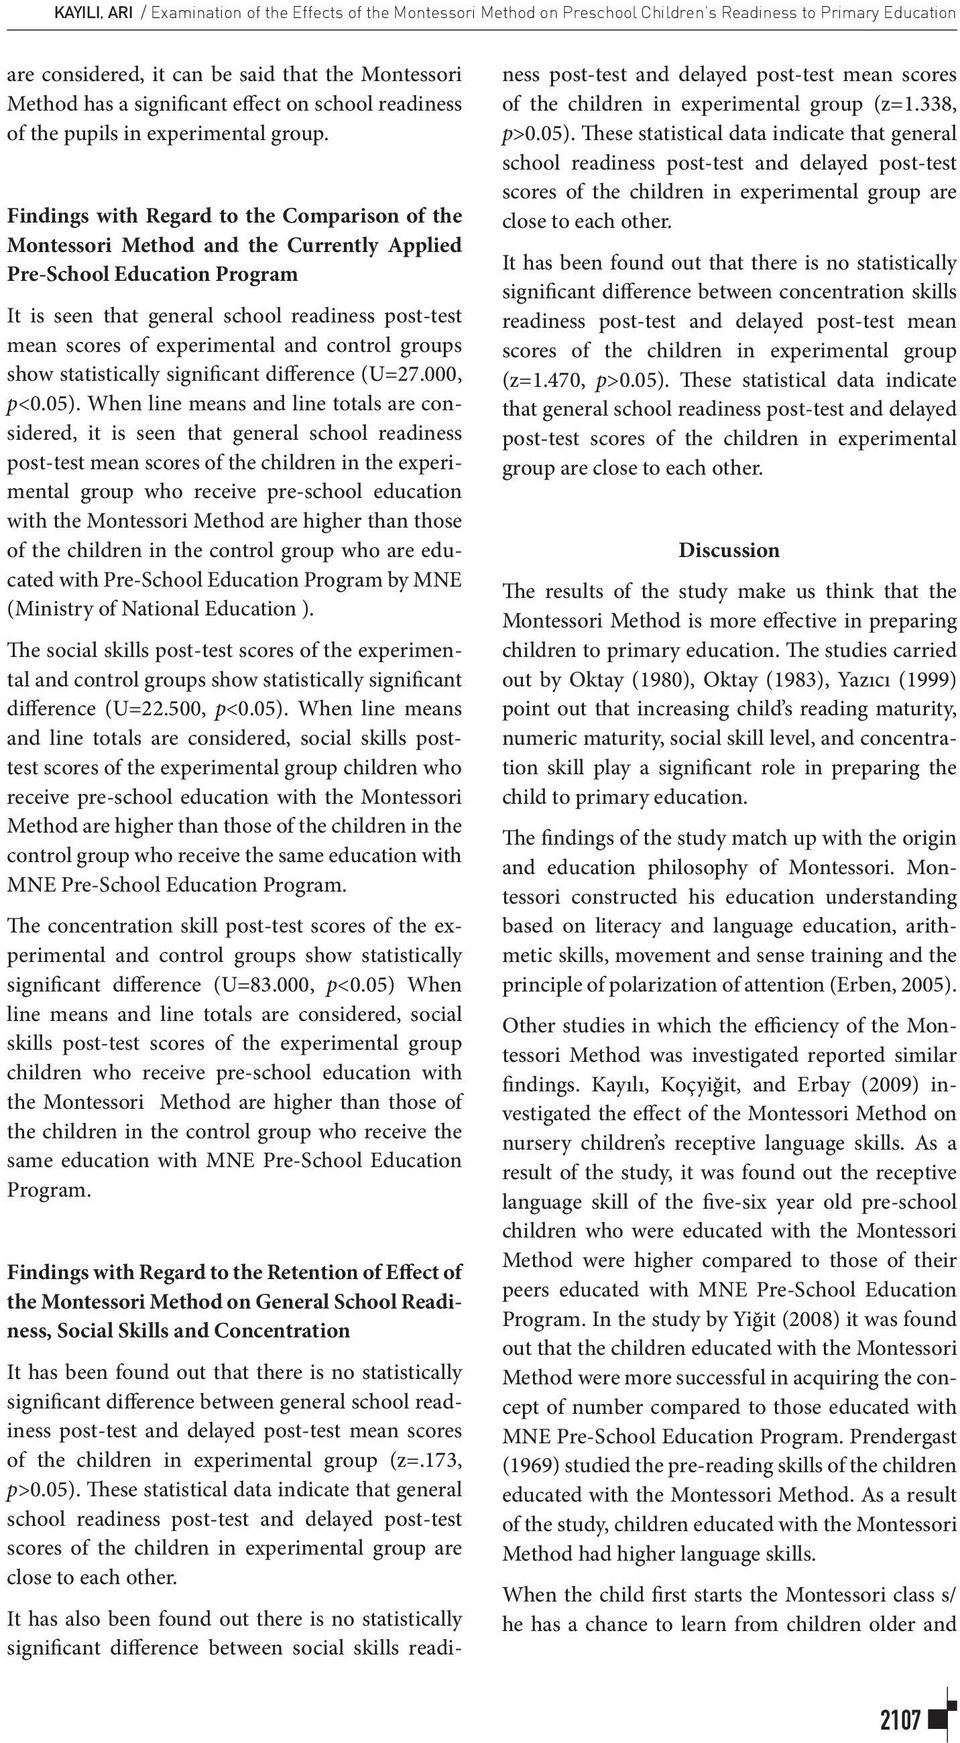 Findings with Regard to the Comparison of the Montessori Method and the Currently Applied Pre-School Education Program It is seen that general school readiness post-test mean scores of experimental